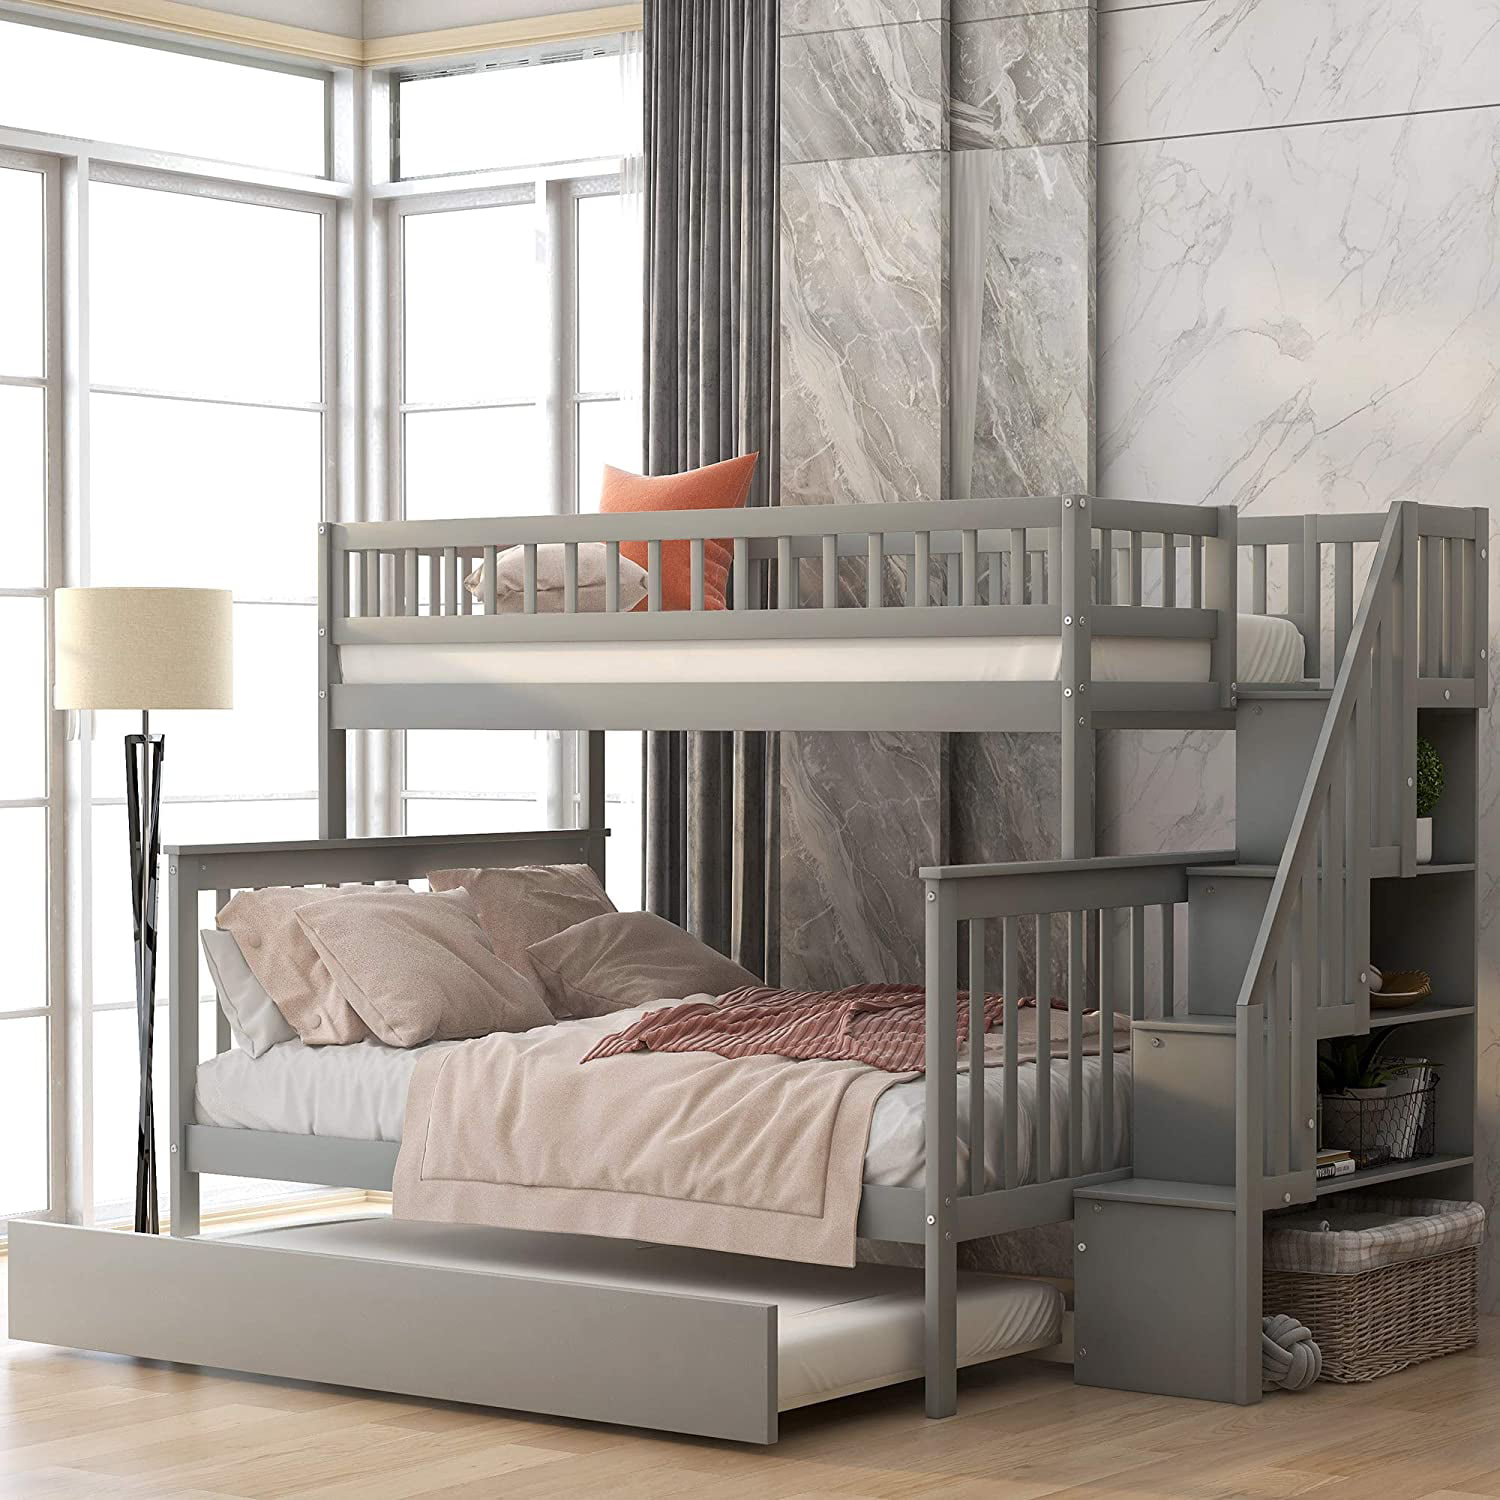 Piscis Bunk Bed Beds Twin Over, Solid Wood Twin Over Full Bunk Bed With Trundle